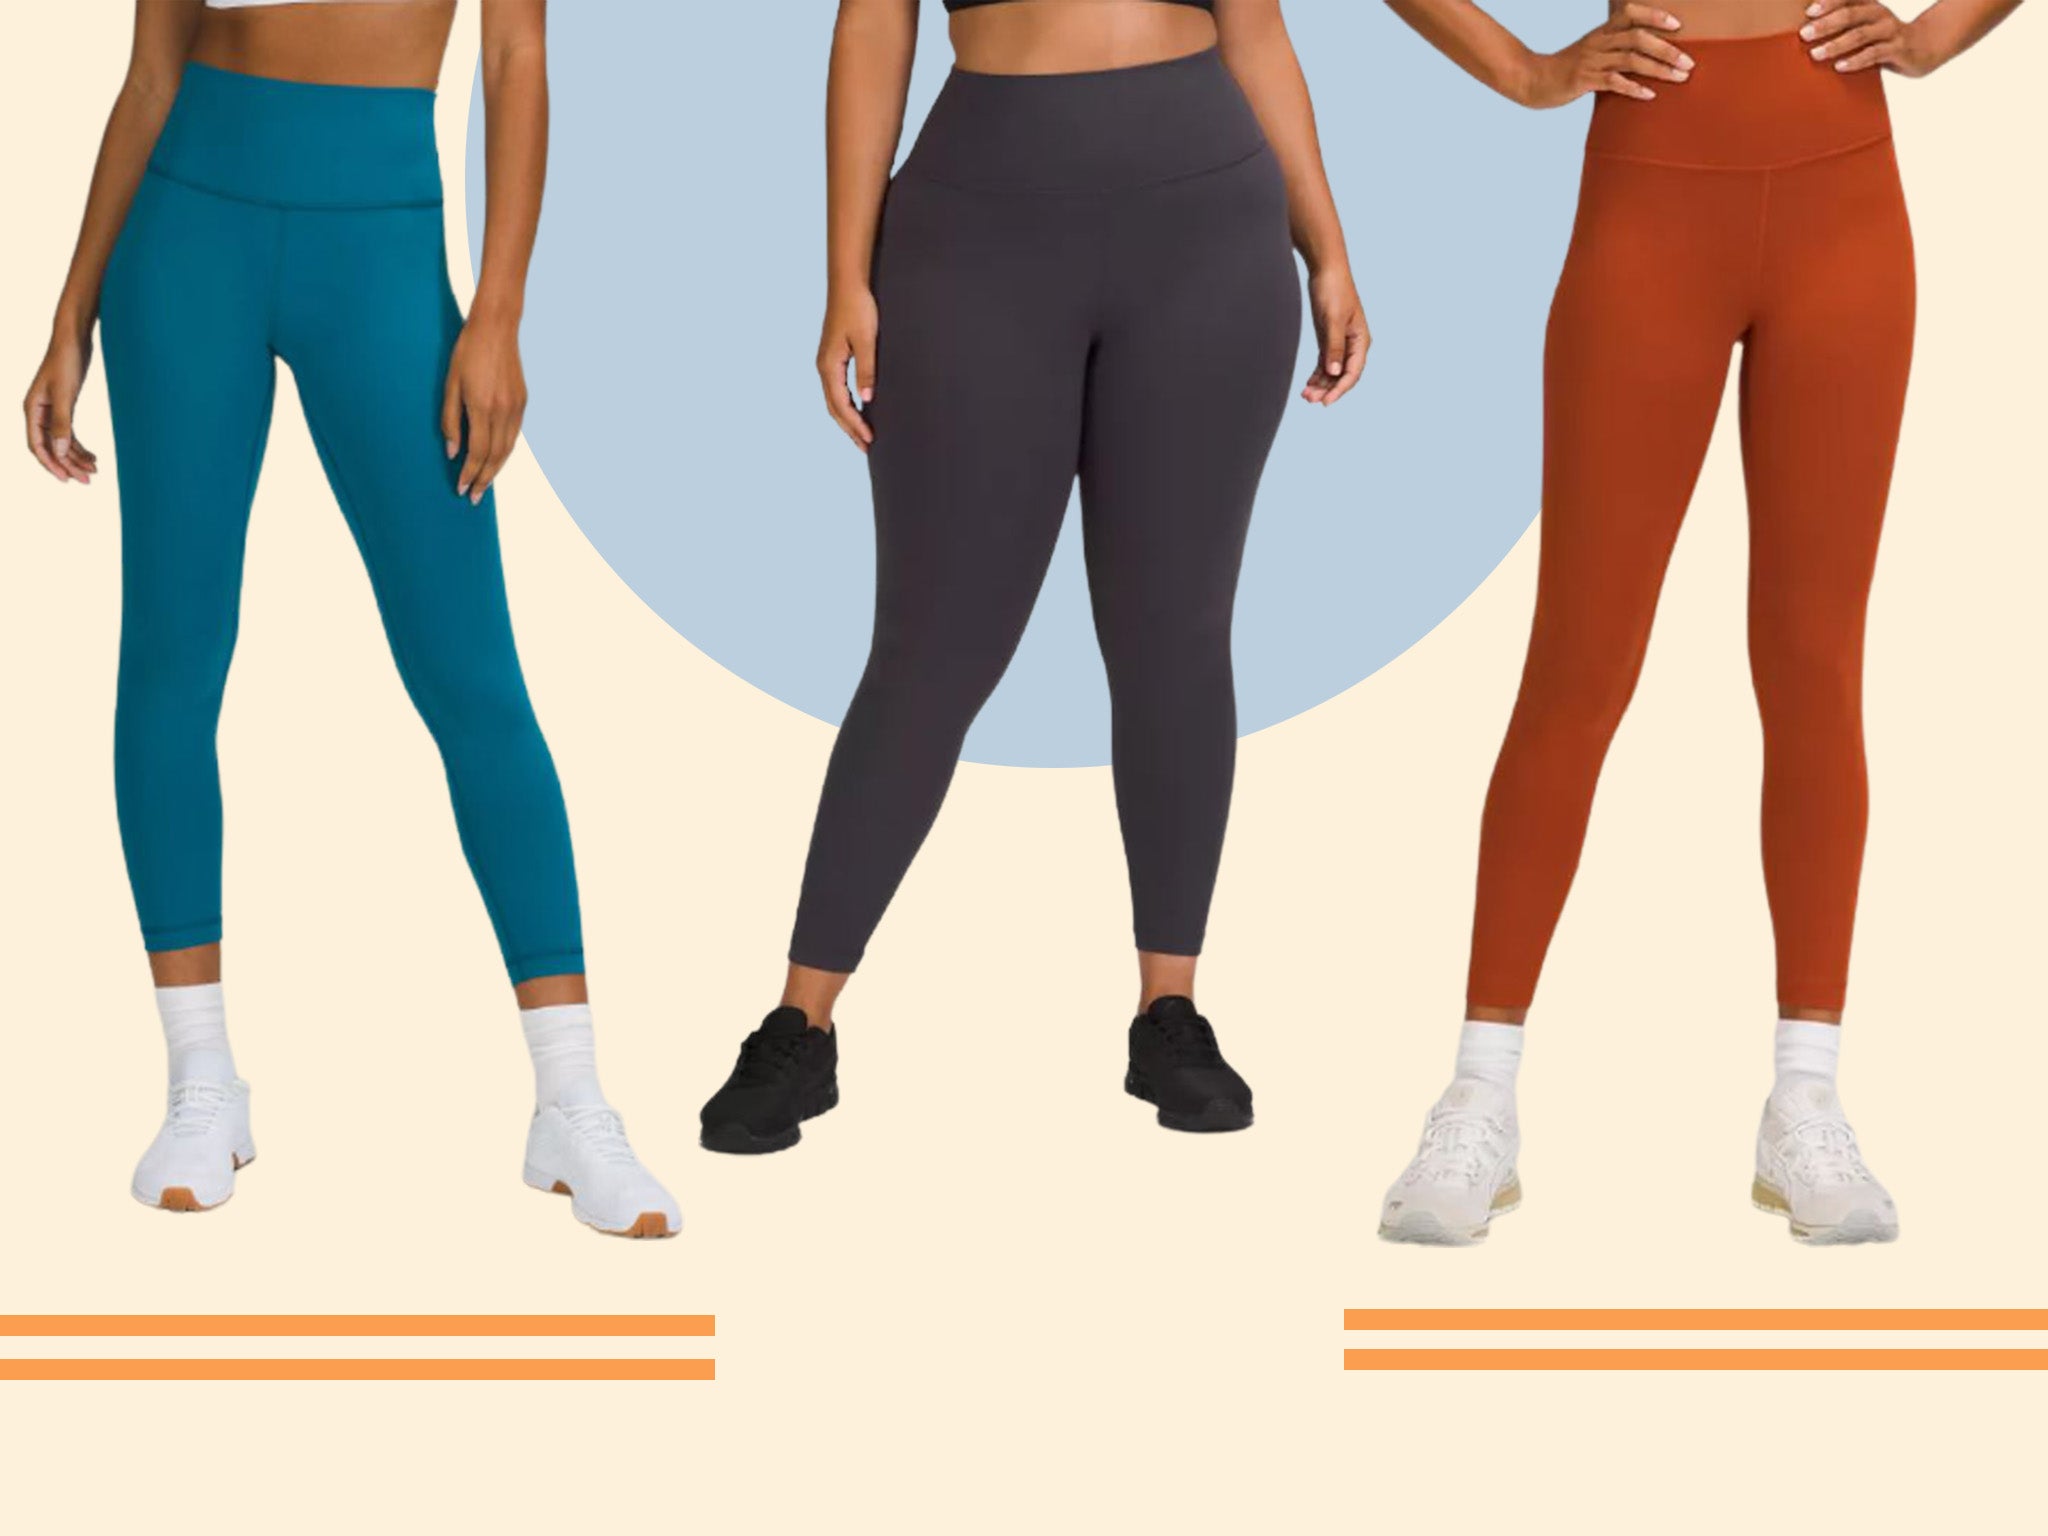 The brand’s activewear is perfect for running, yoga, hiking and more